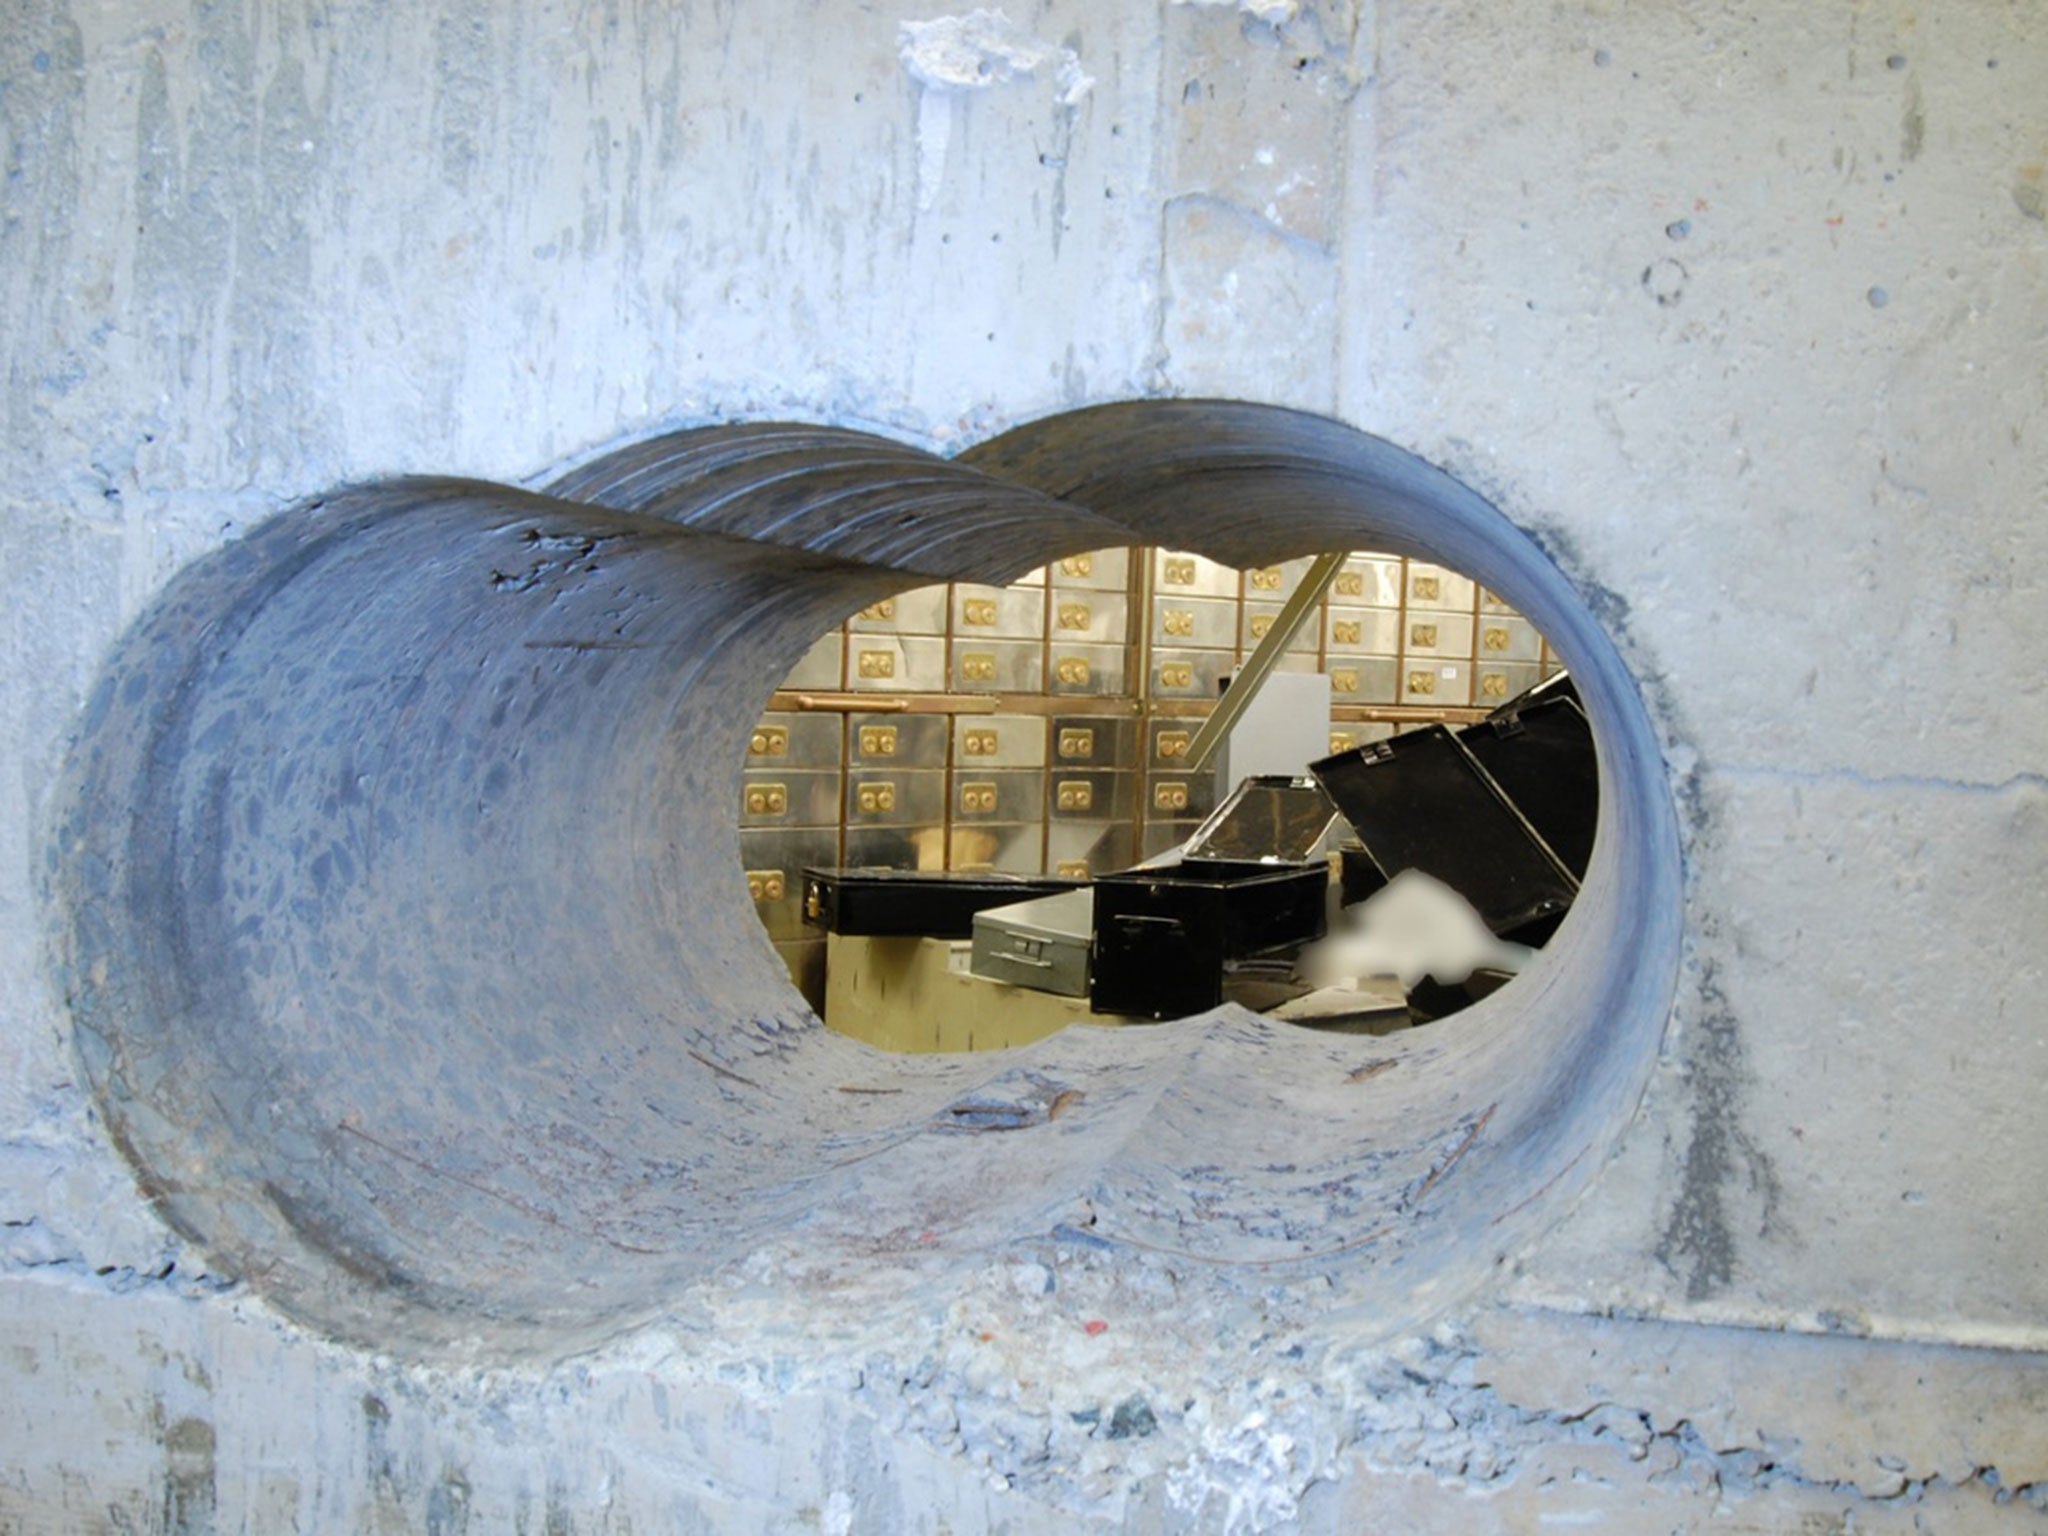 The thieves used a heavy duty drill to bore huge holes into the concrete vault wall